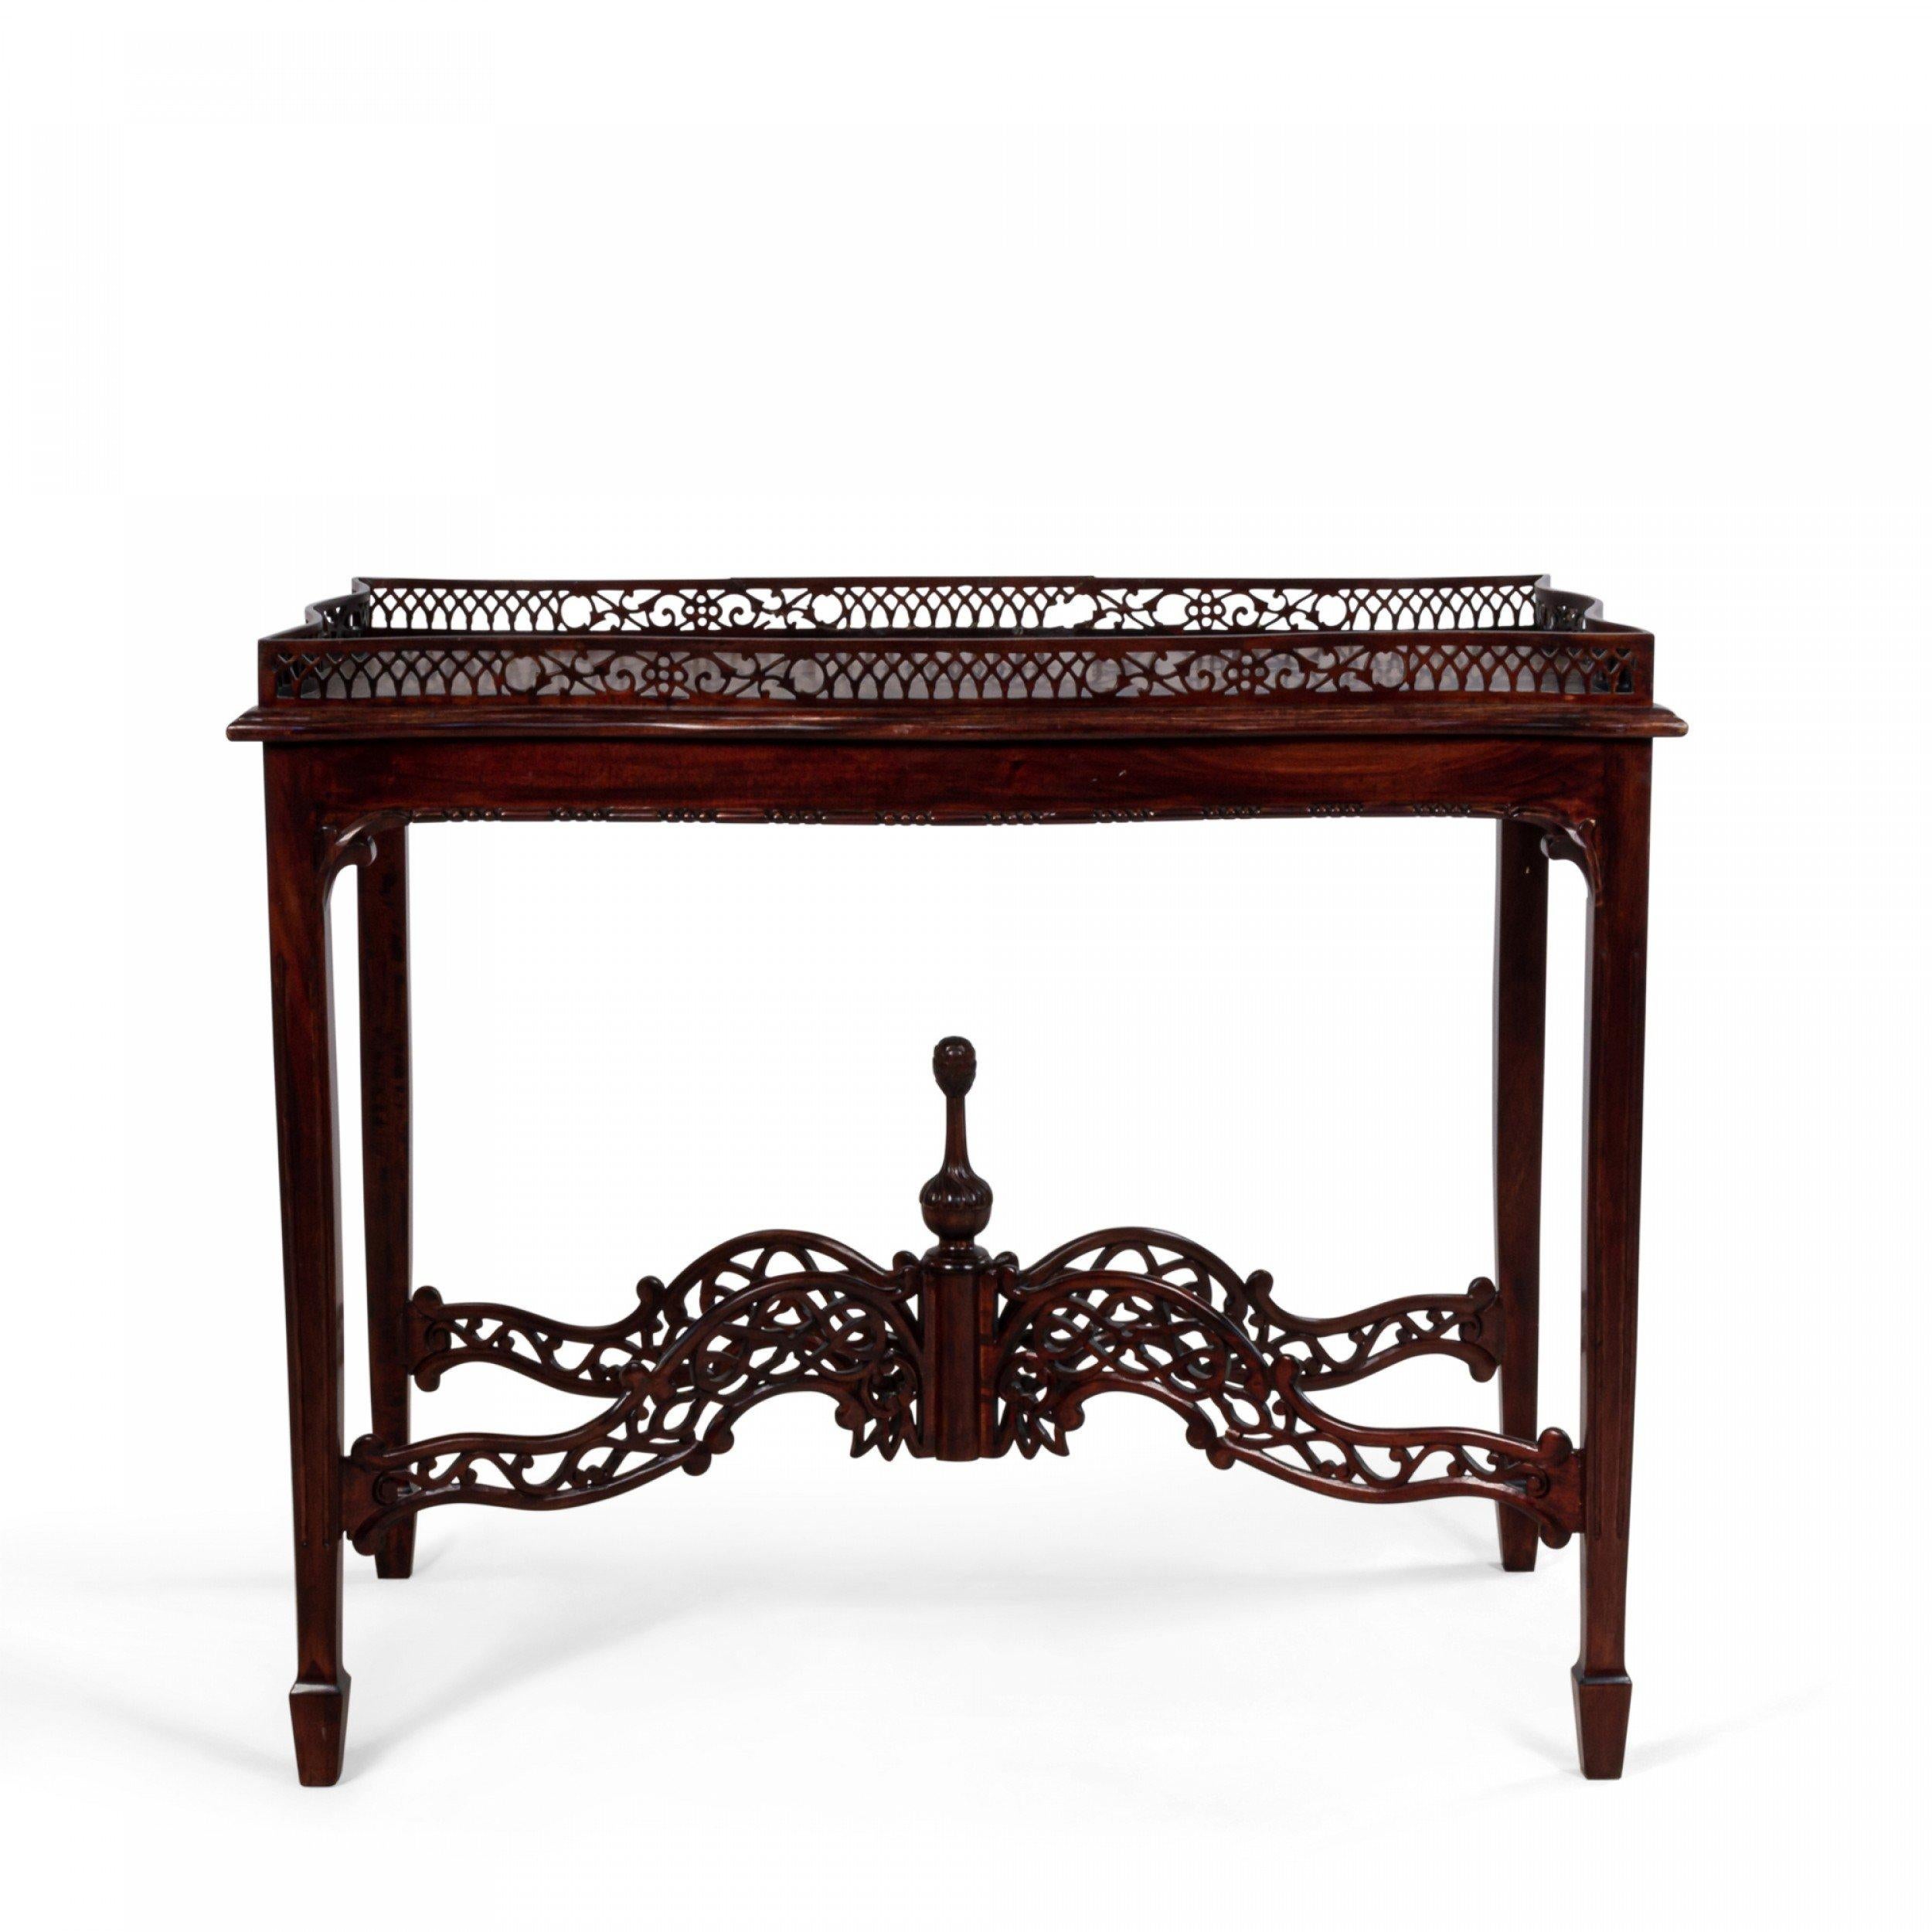 20th century English Chinese Chippendale style mahogany table with carved gallery, spade feet, and stretcher base with decorative carved finial.